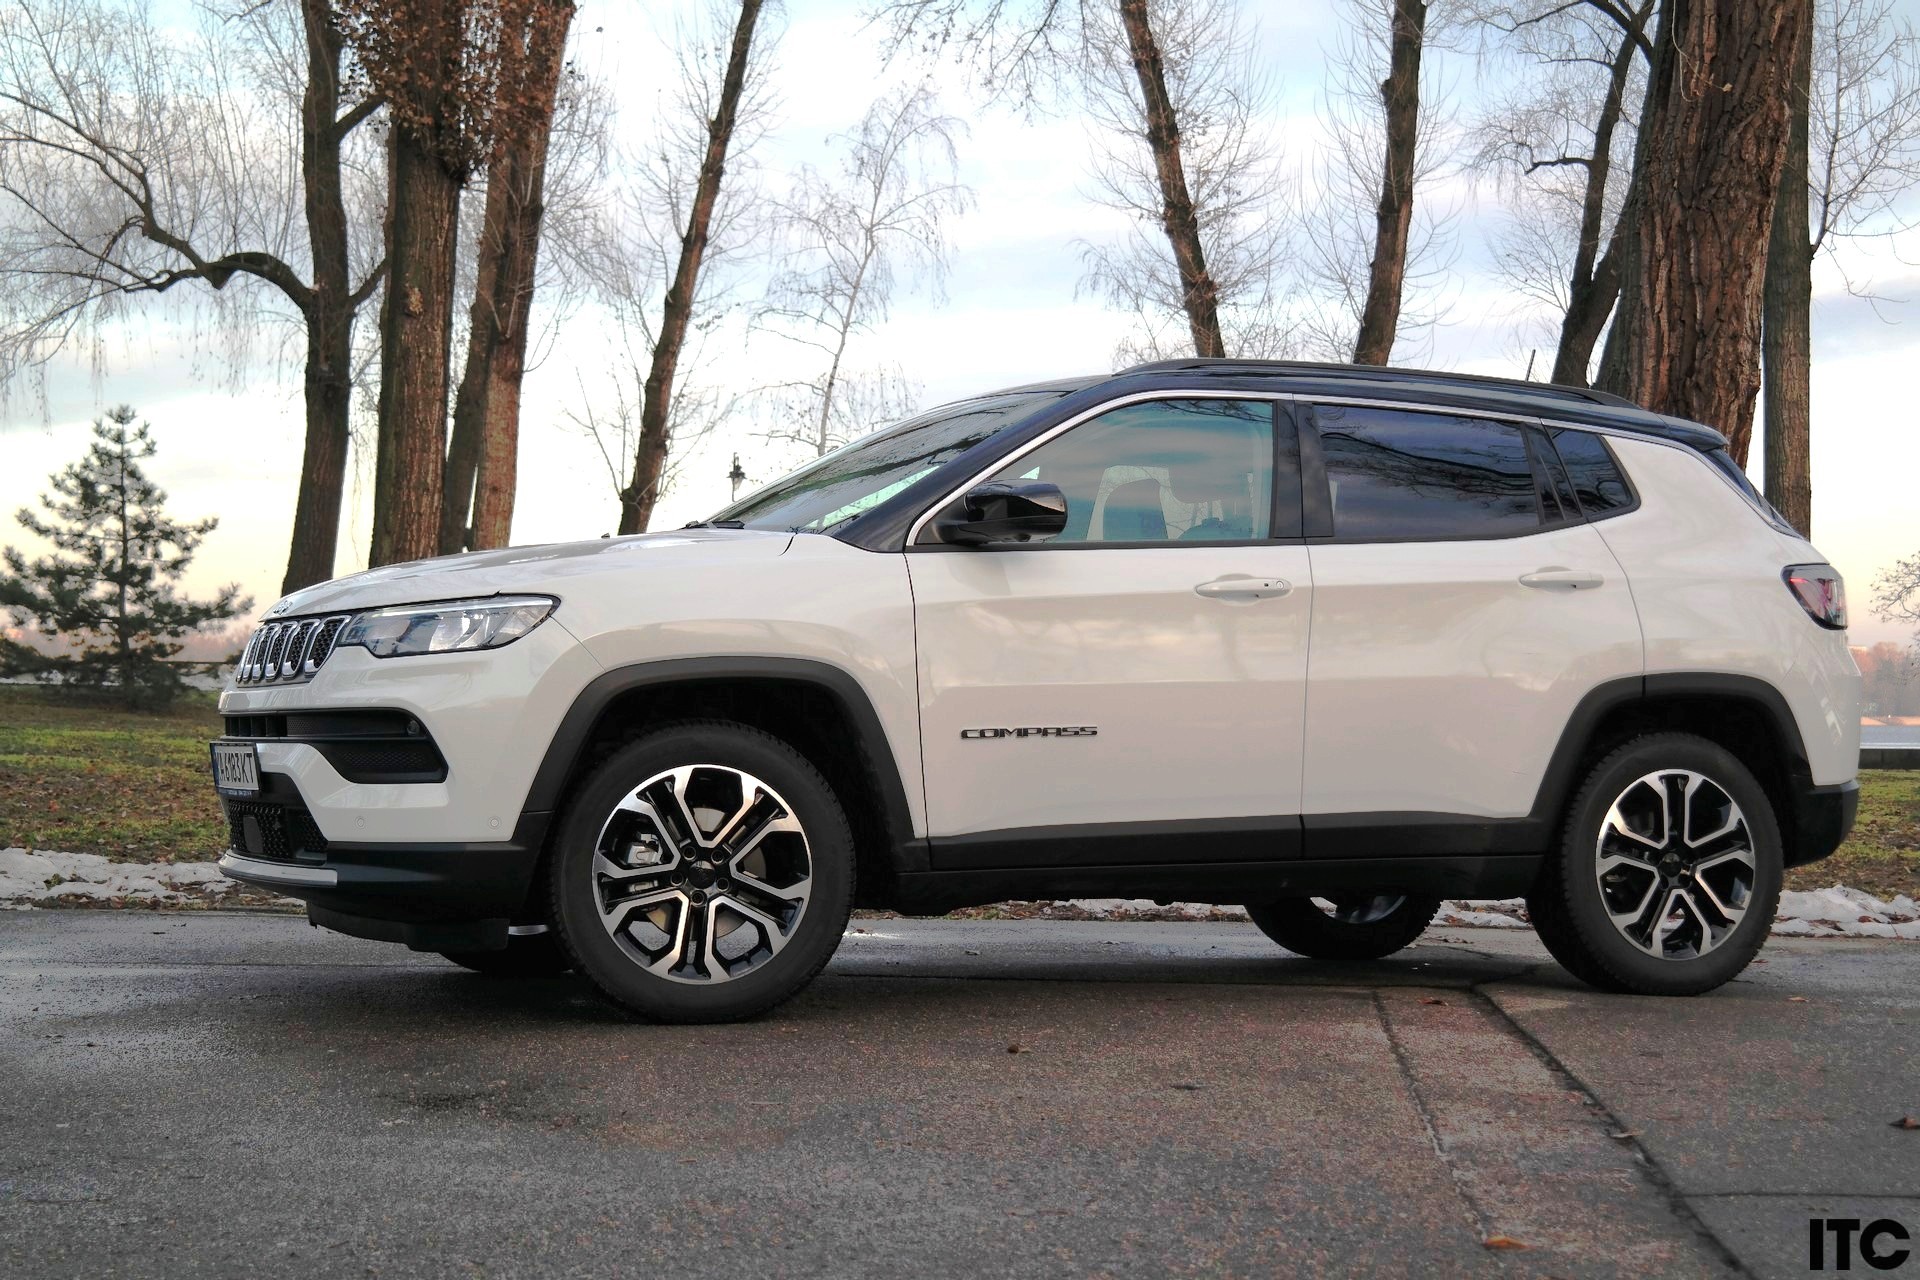 Jeep Compass test drive: chosen course for popular popularity?